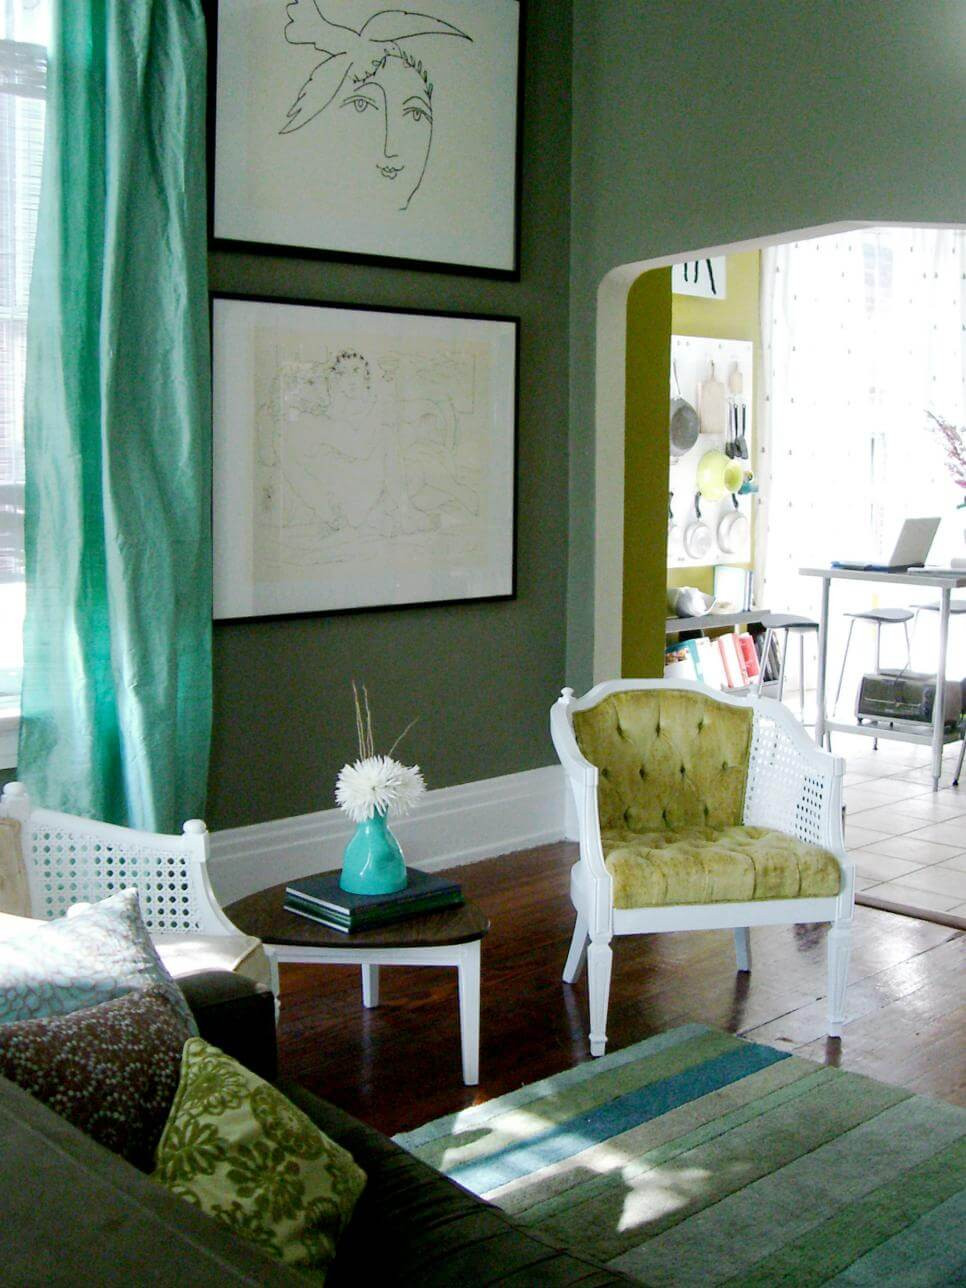 Painting A Living Room
 Paint Ideas for Living Room with Narrow Space TheyDesign